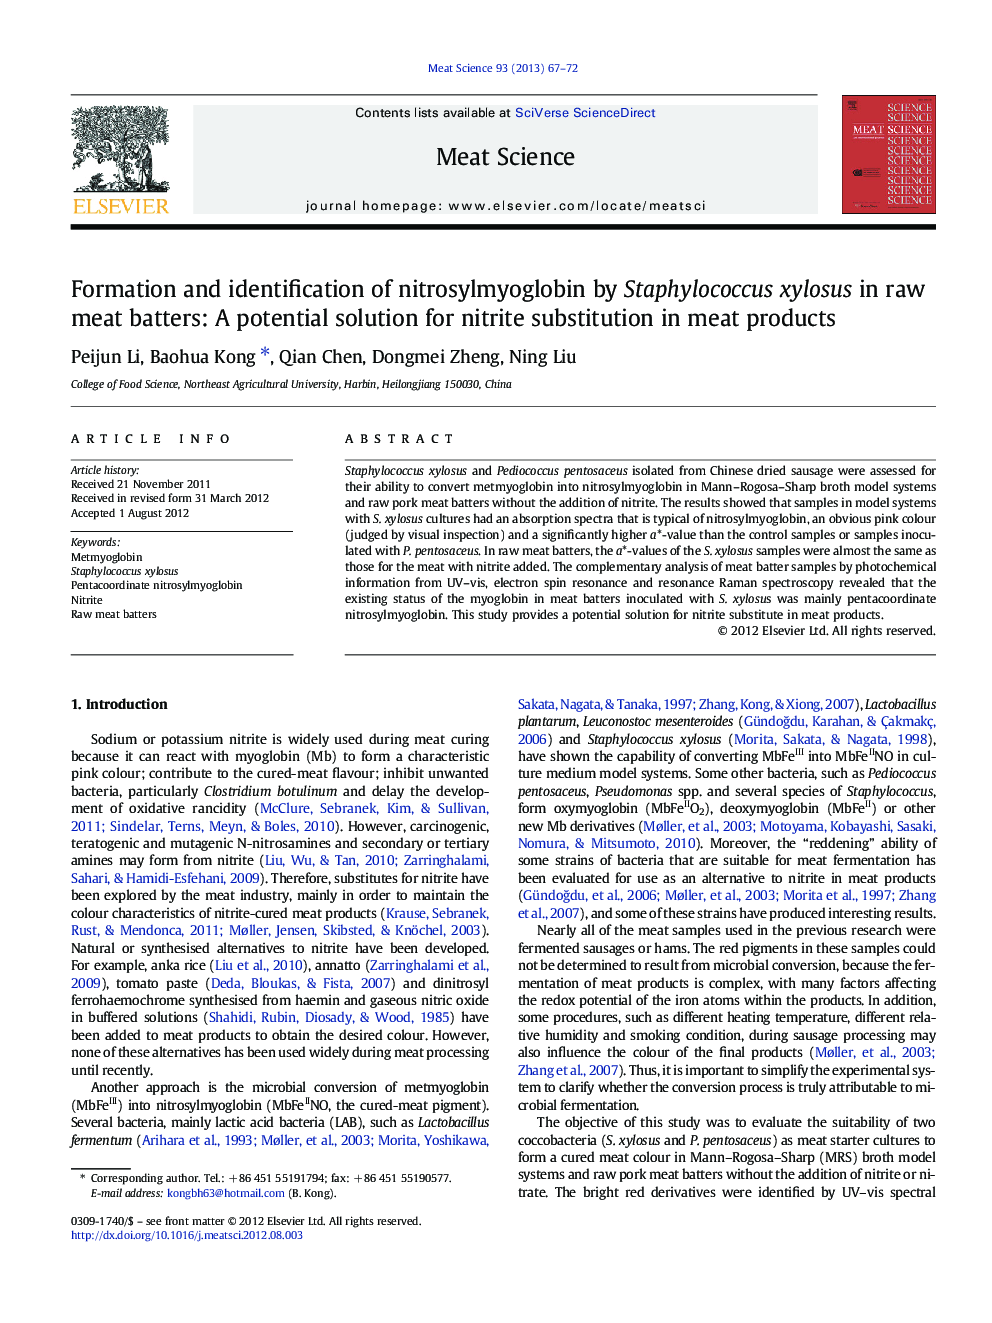 Formation and identification of nitrosylmyoglobin by Staphylococcus xylosus in raw meat batters: A potential solution for nitrite substitution in meat products